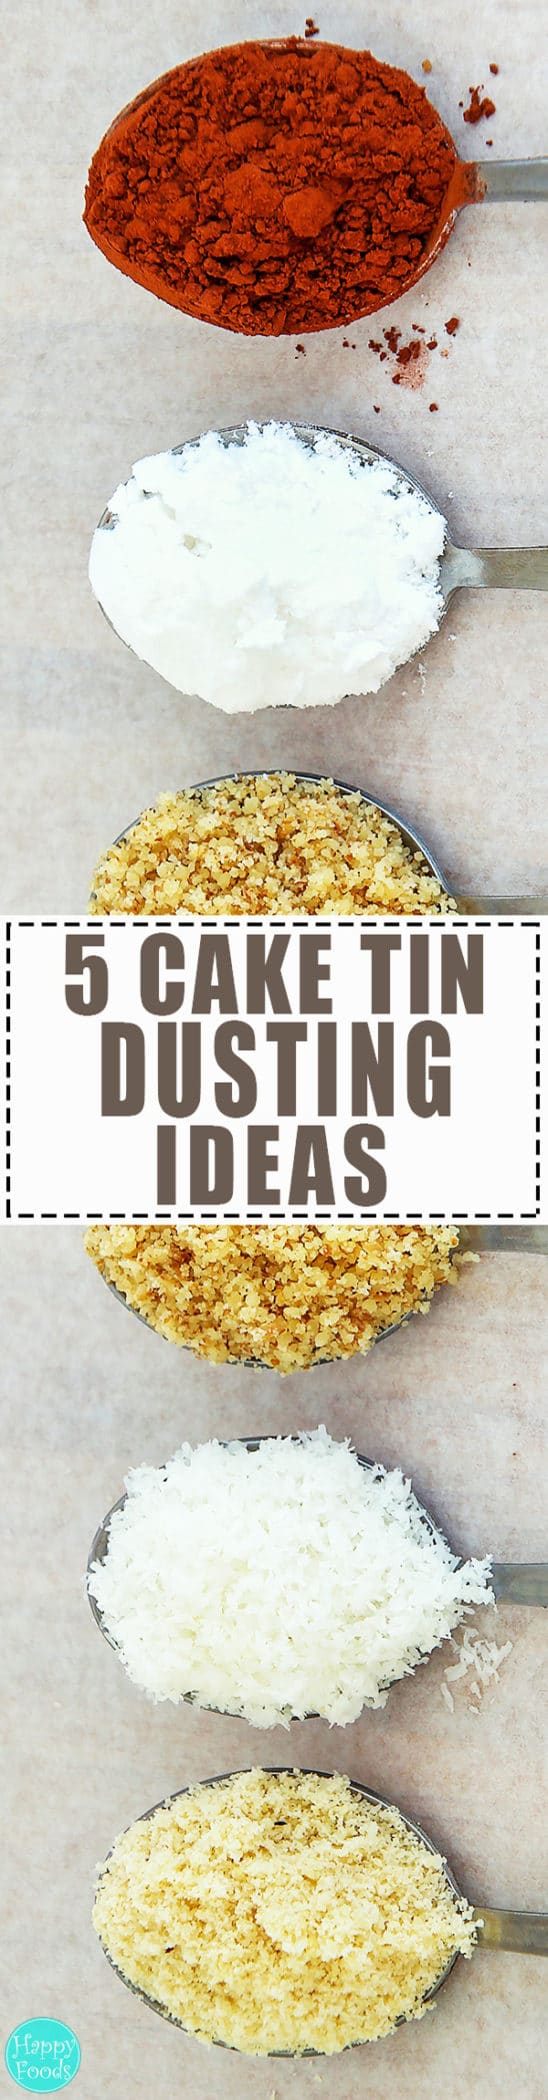 Cake Tin Dusting - How to prepare tins before baking. Cooking / baking tips. 5 ways: cocoa powder, ground almonds, ground walnuts, desiccated coconut and icing | happyfoodstube.com